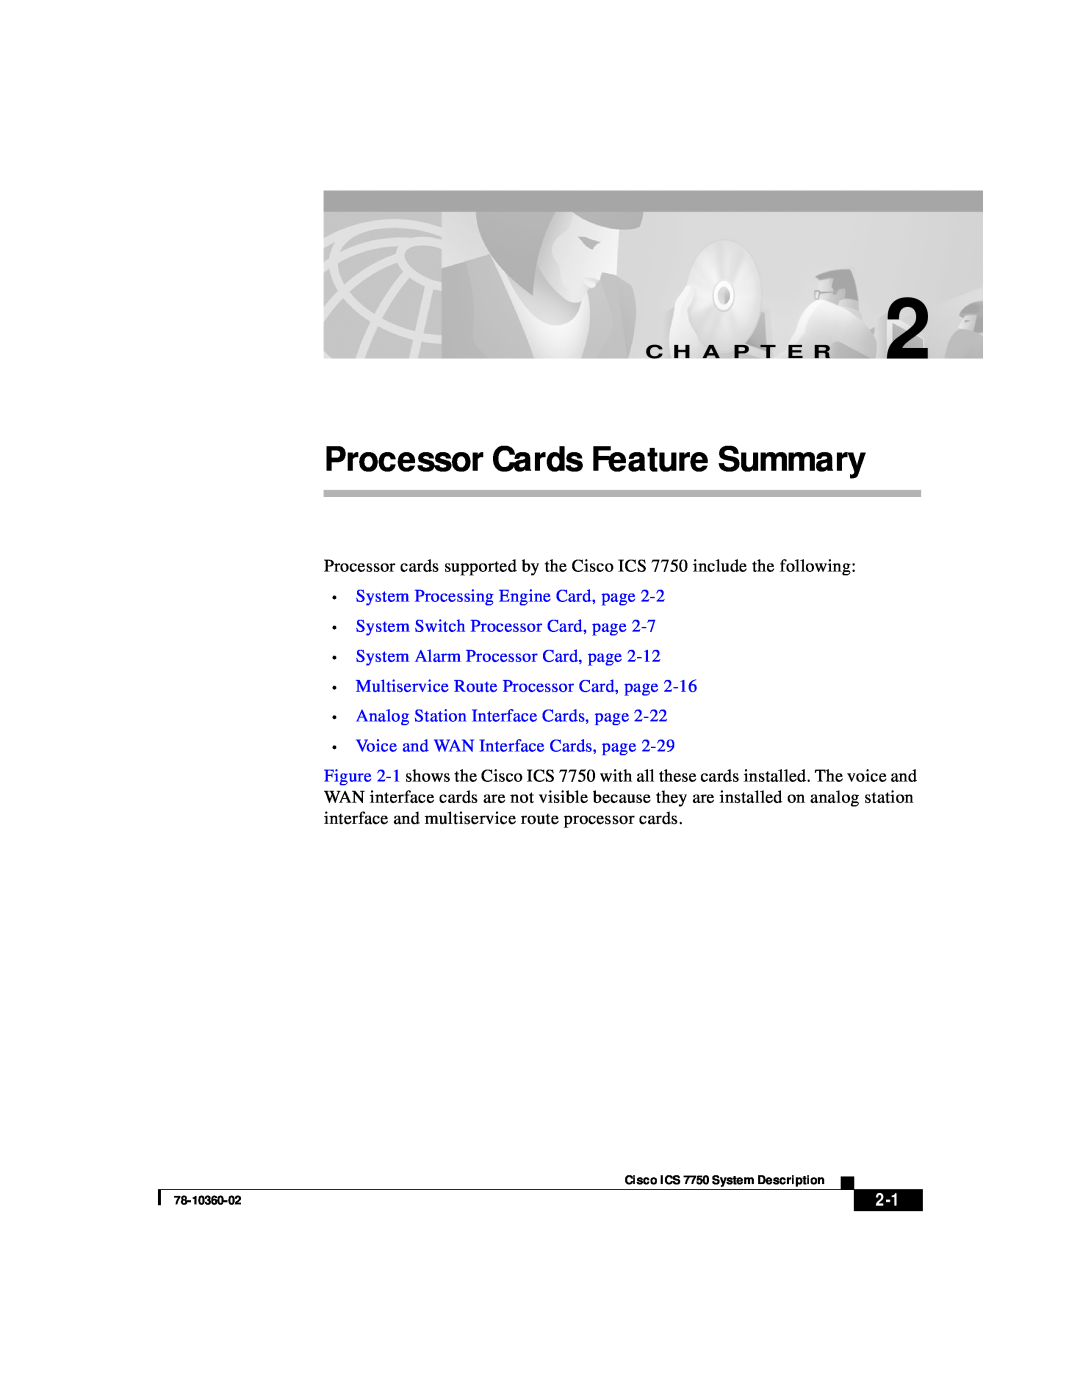 Cisco Systems ICS-7750 manual Processor Cards Feature Summary, C H A P T E R, System Processing Engine Card, page 